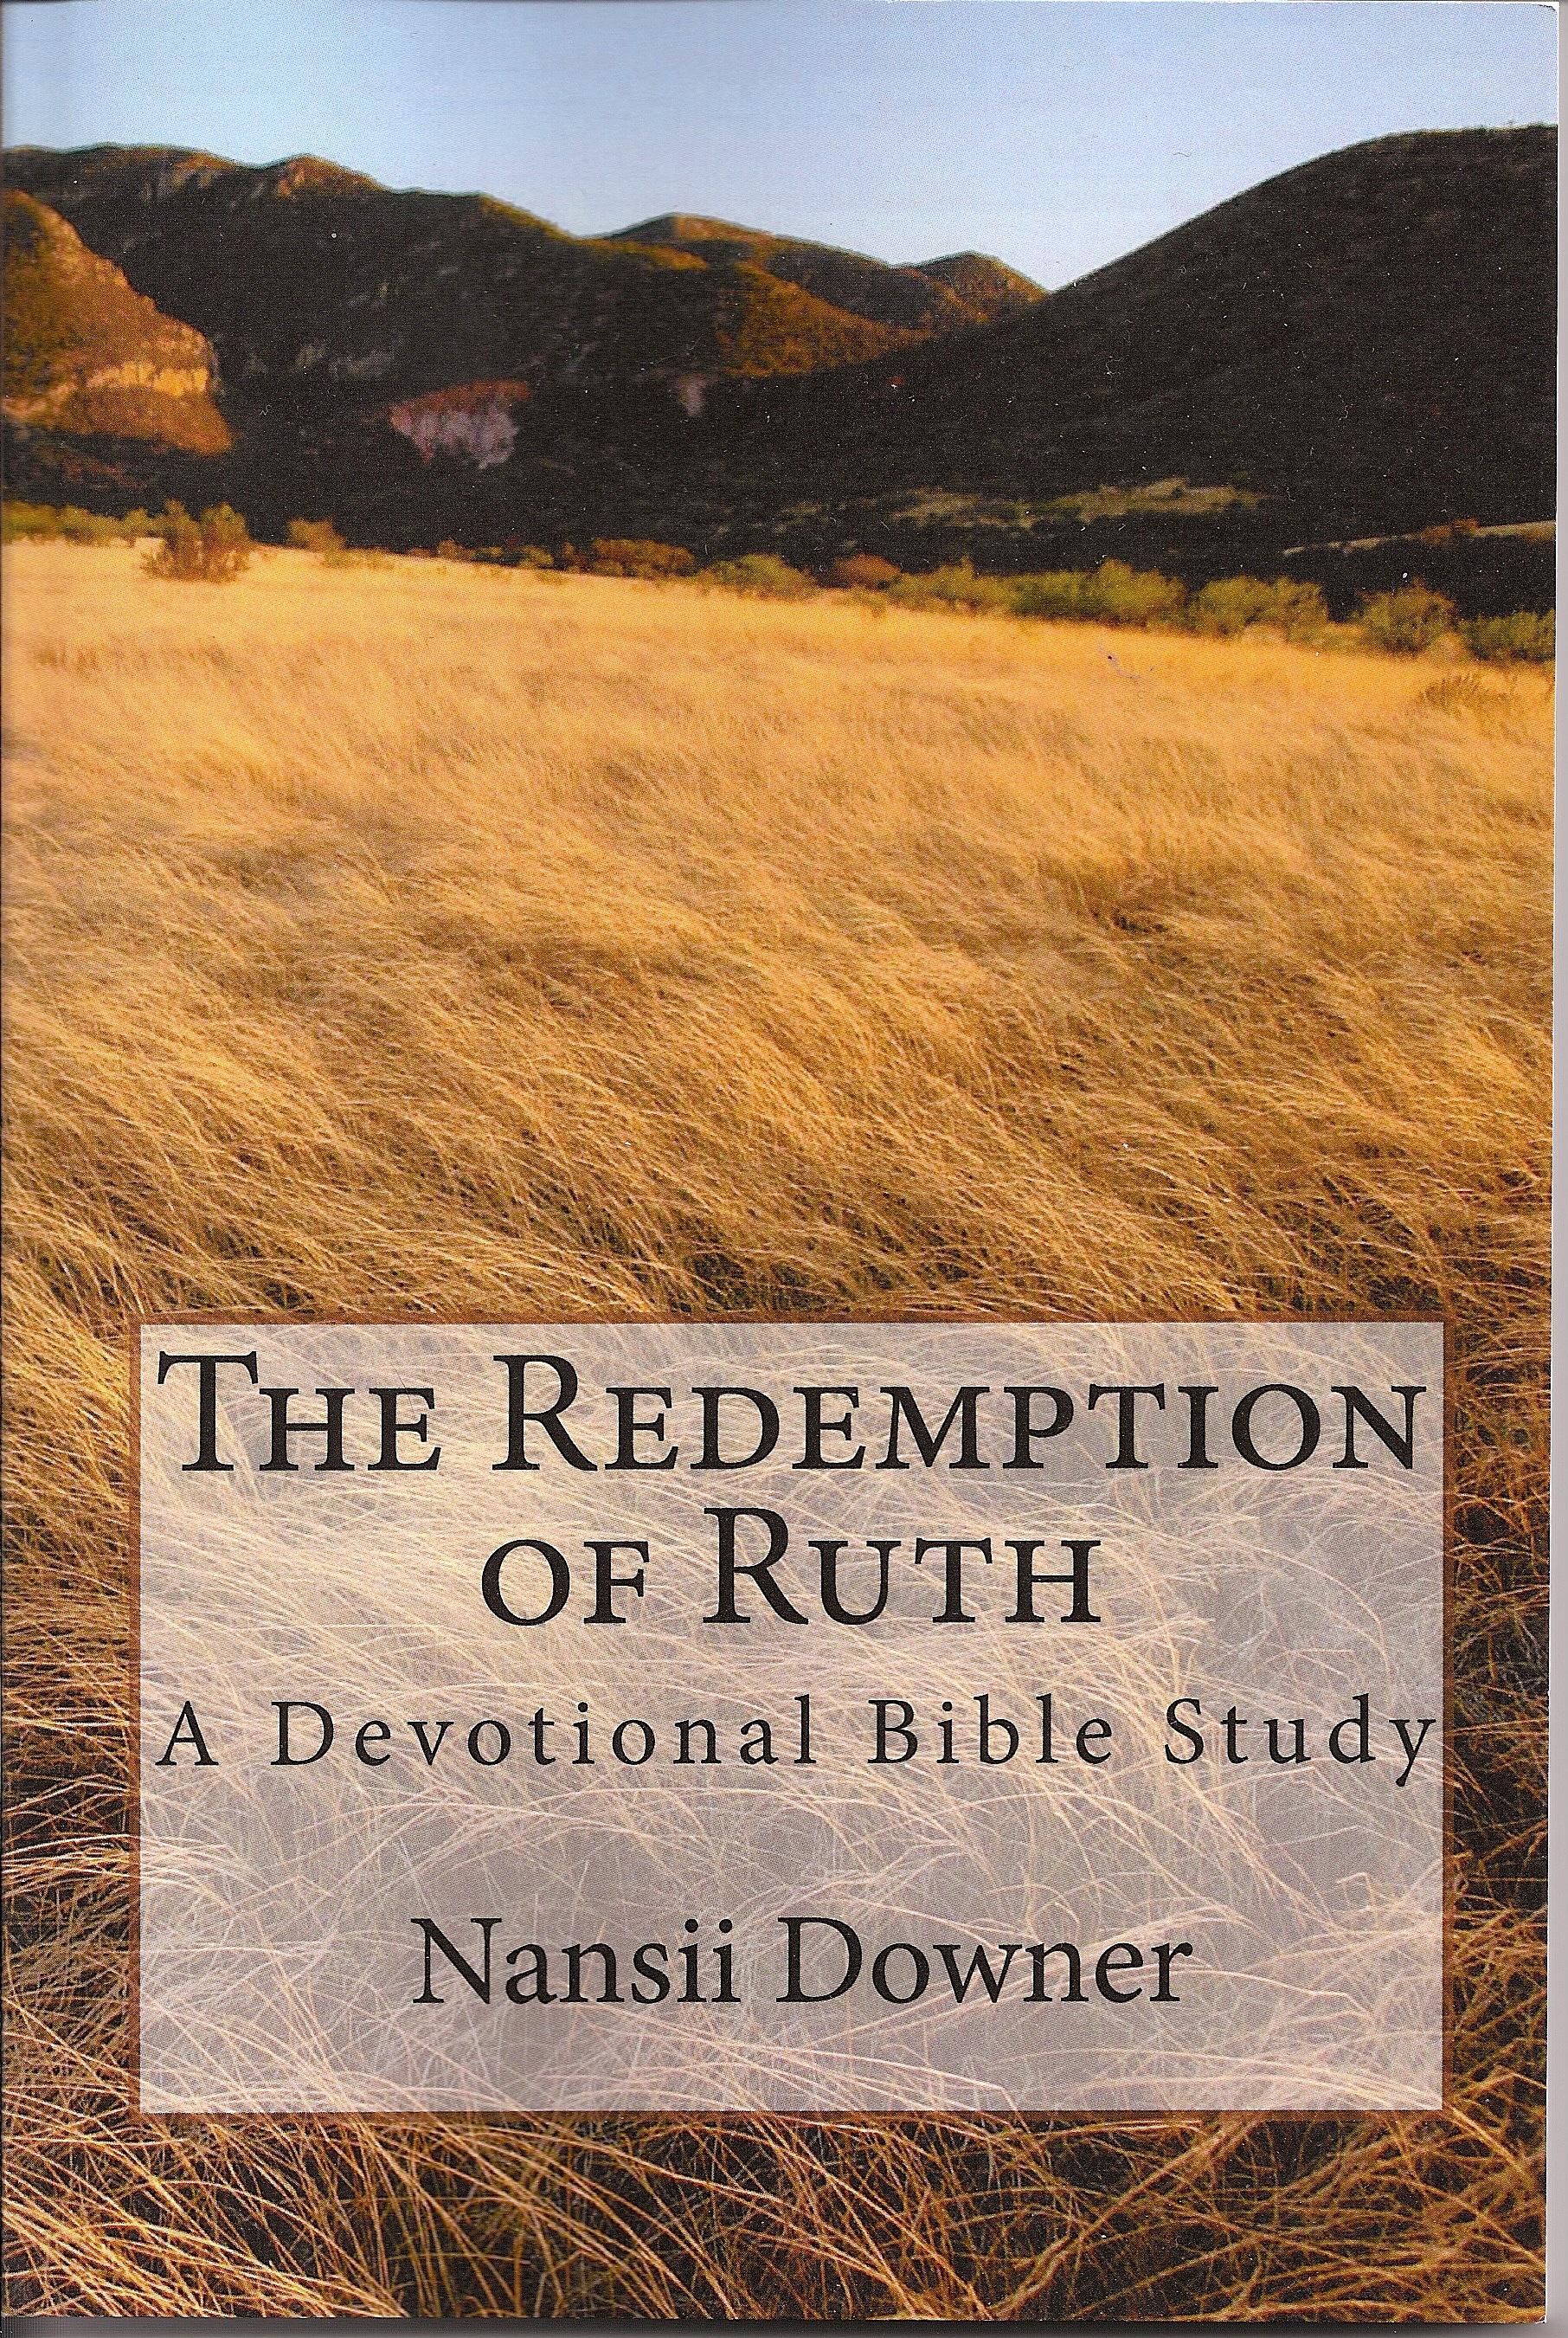 The Redemption of Ruth